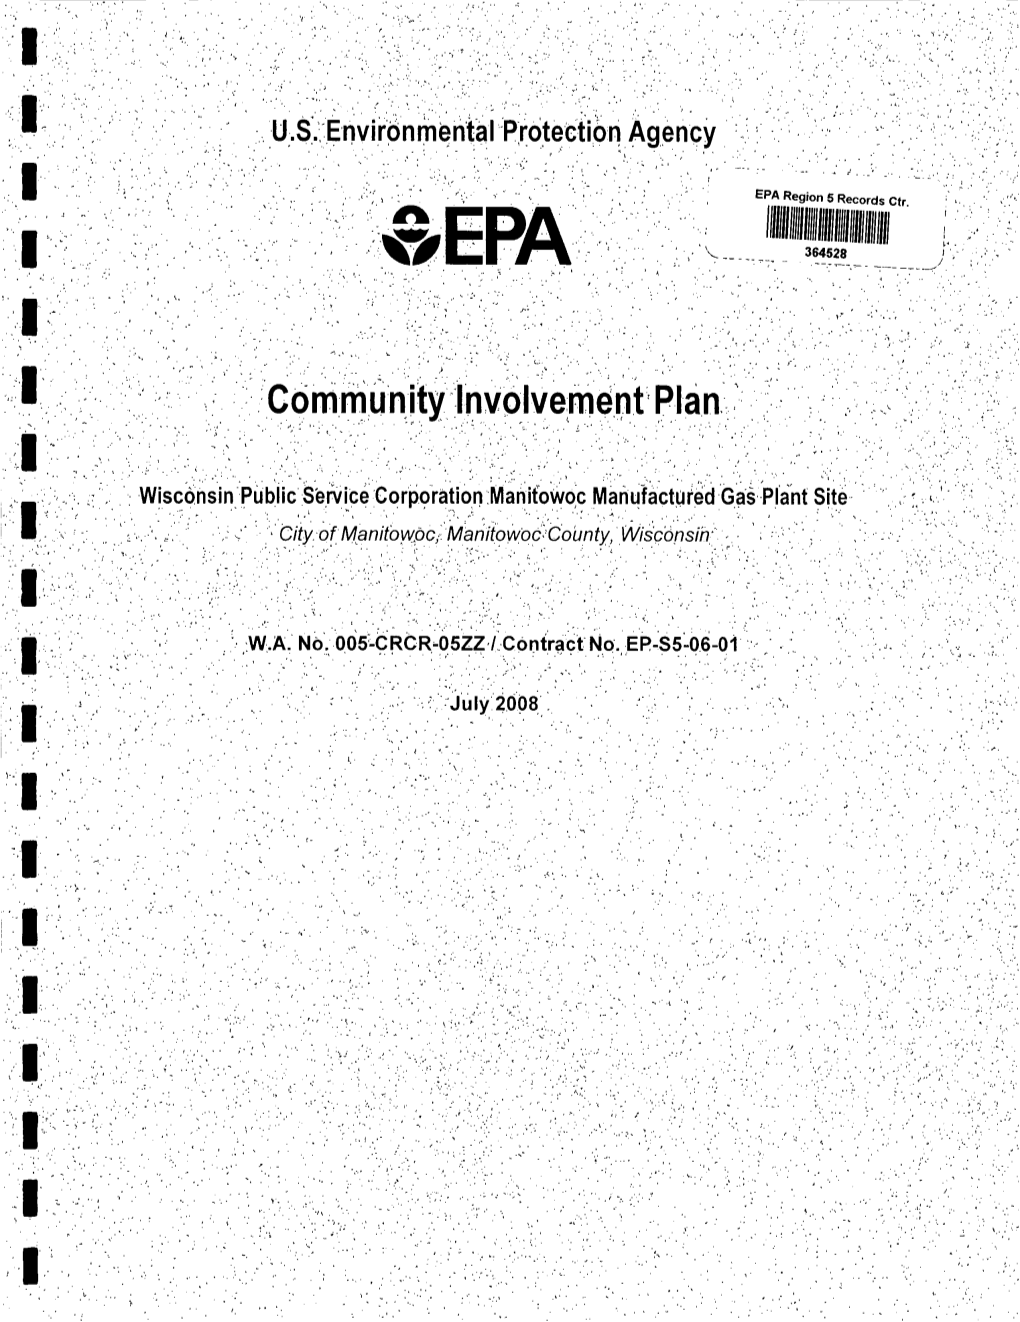 Community Involvement Plan for the Wisconsin Public Service Corp., Manitowoc Manufactured Gas Plant Site Was Prepared by U.S